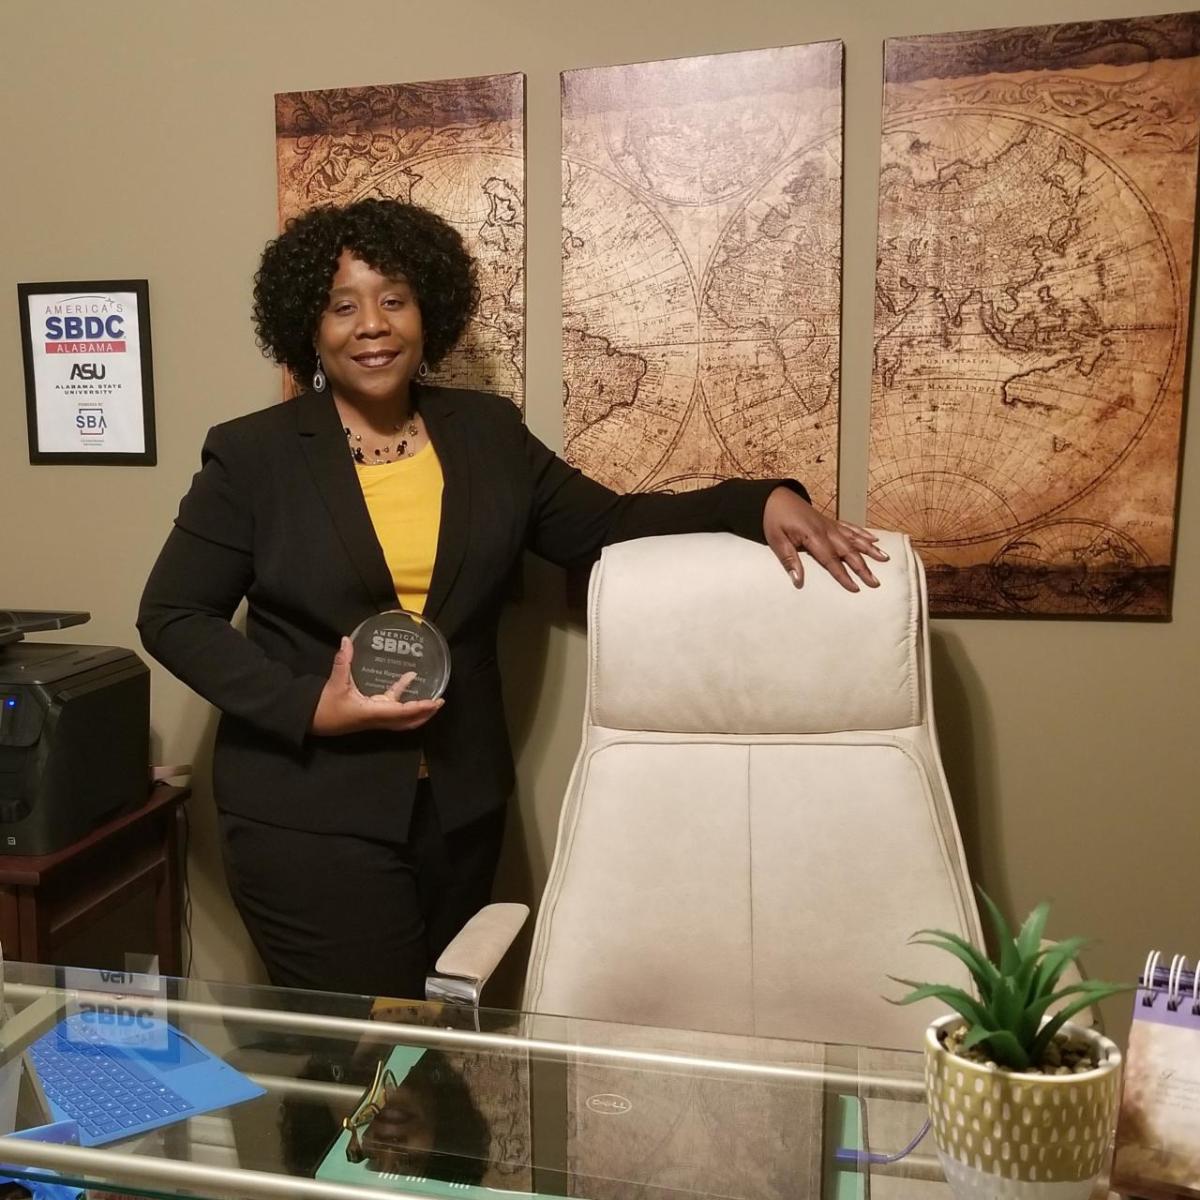 Caption: Andrea Rogers Mosley, Director of the Alabama SBDC Network at Alabama State University